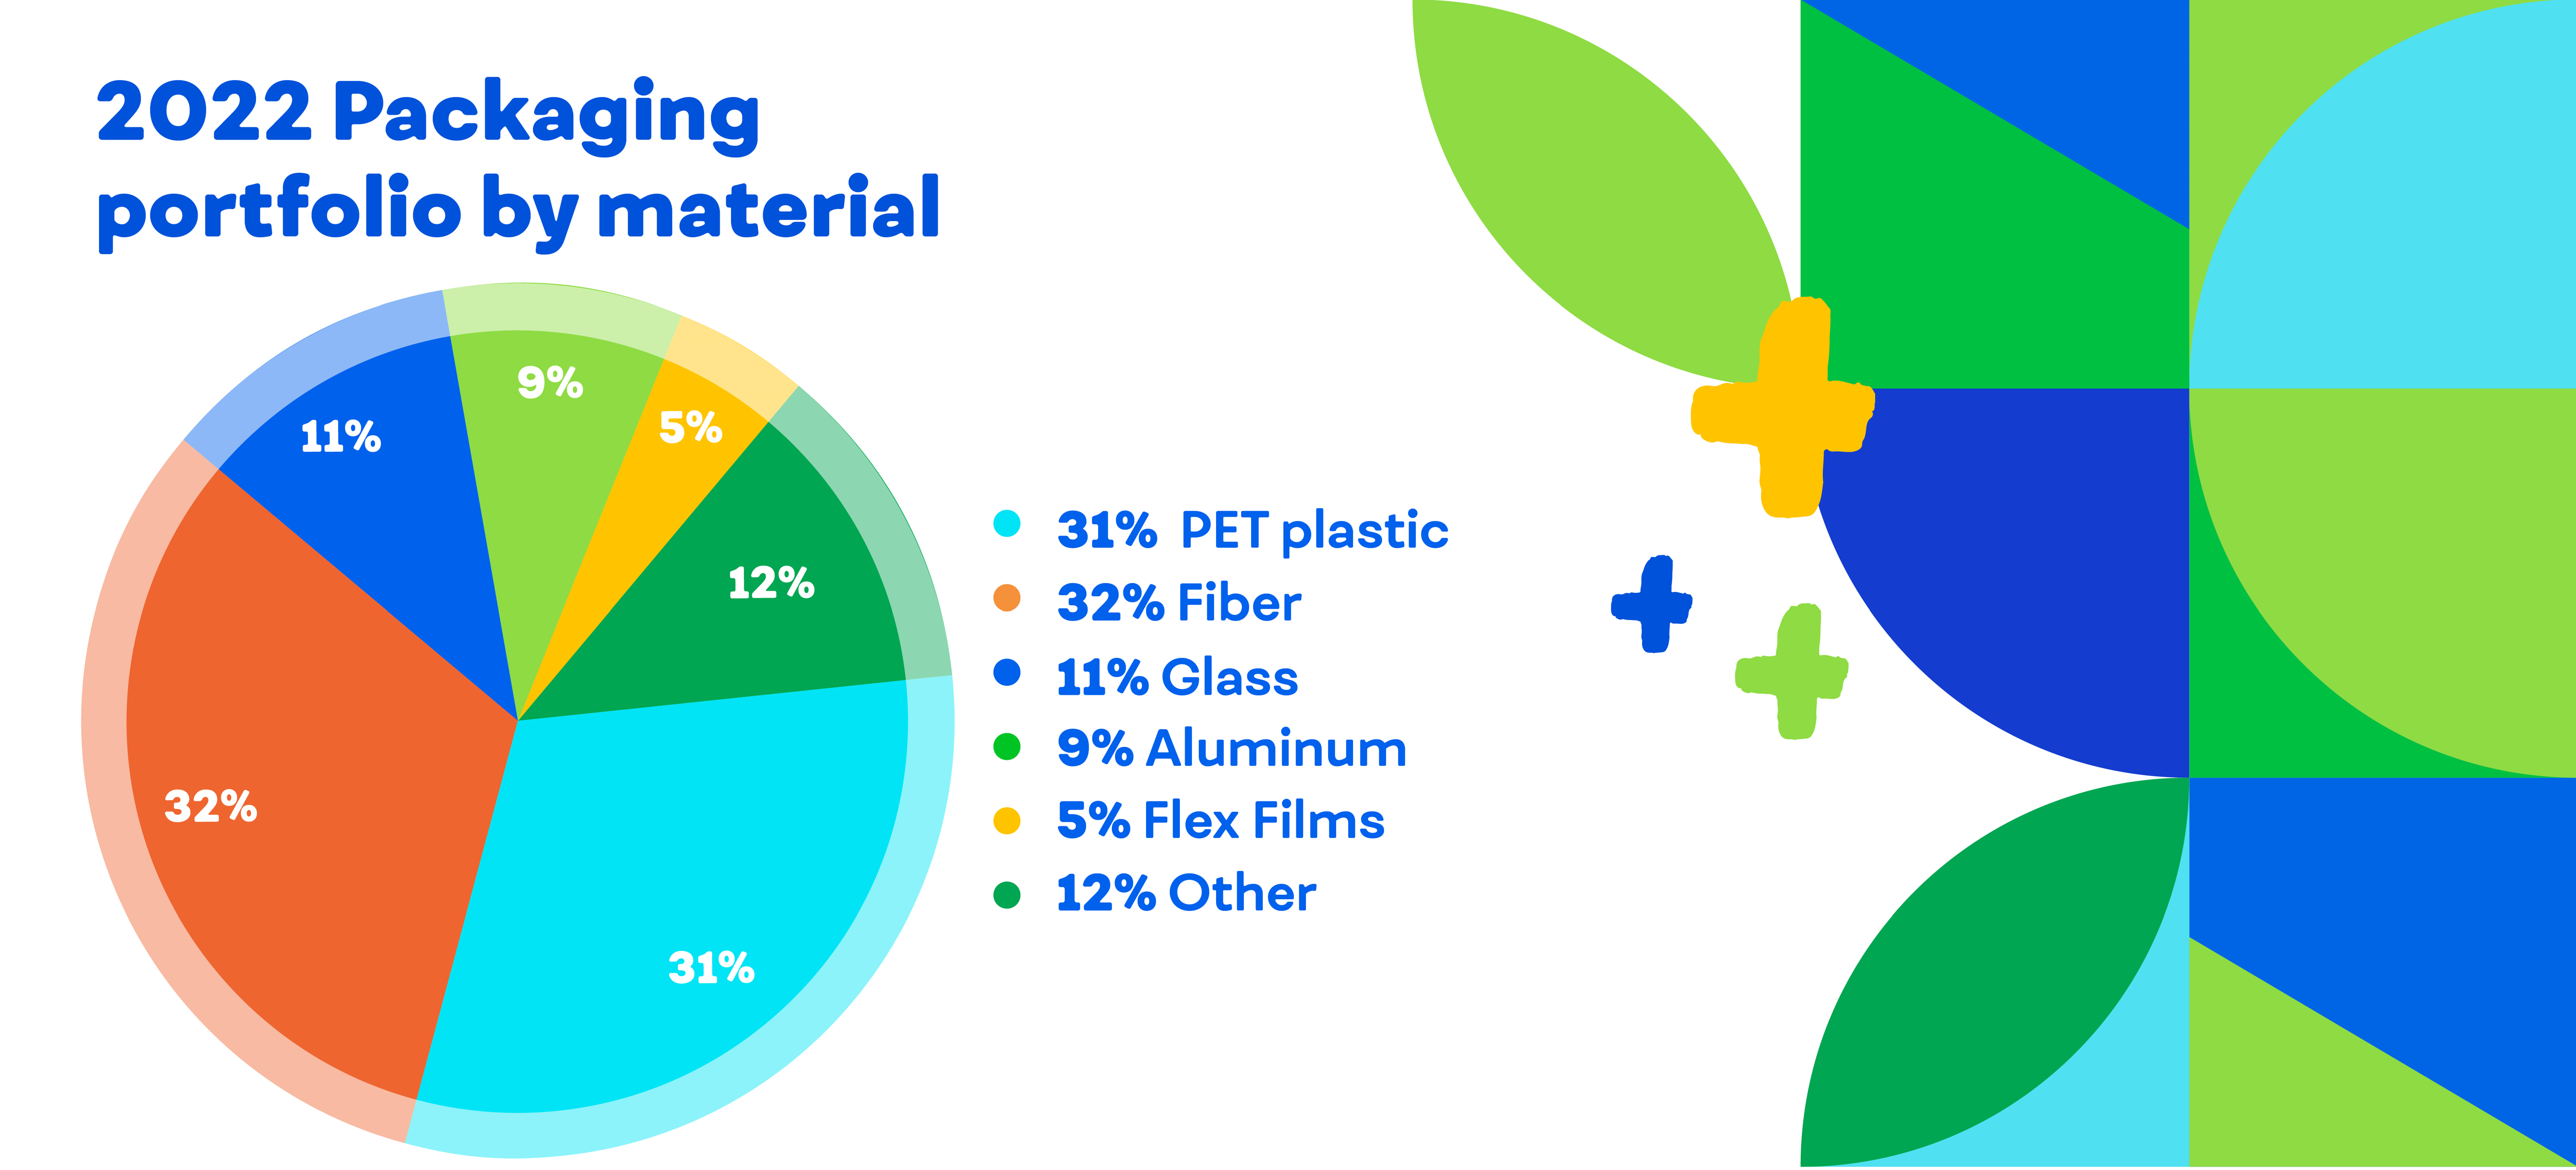 2022 Packaging portfolio by material infographic